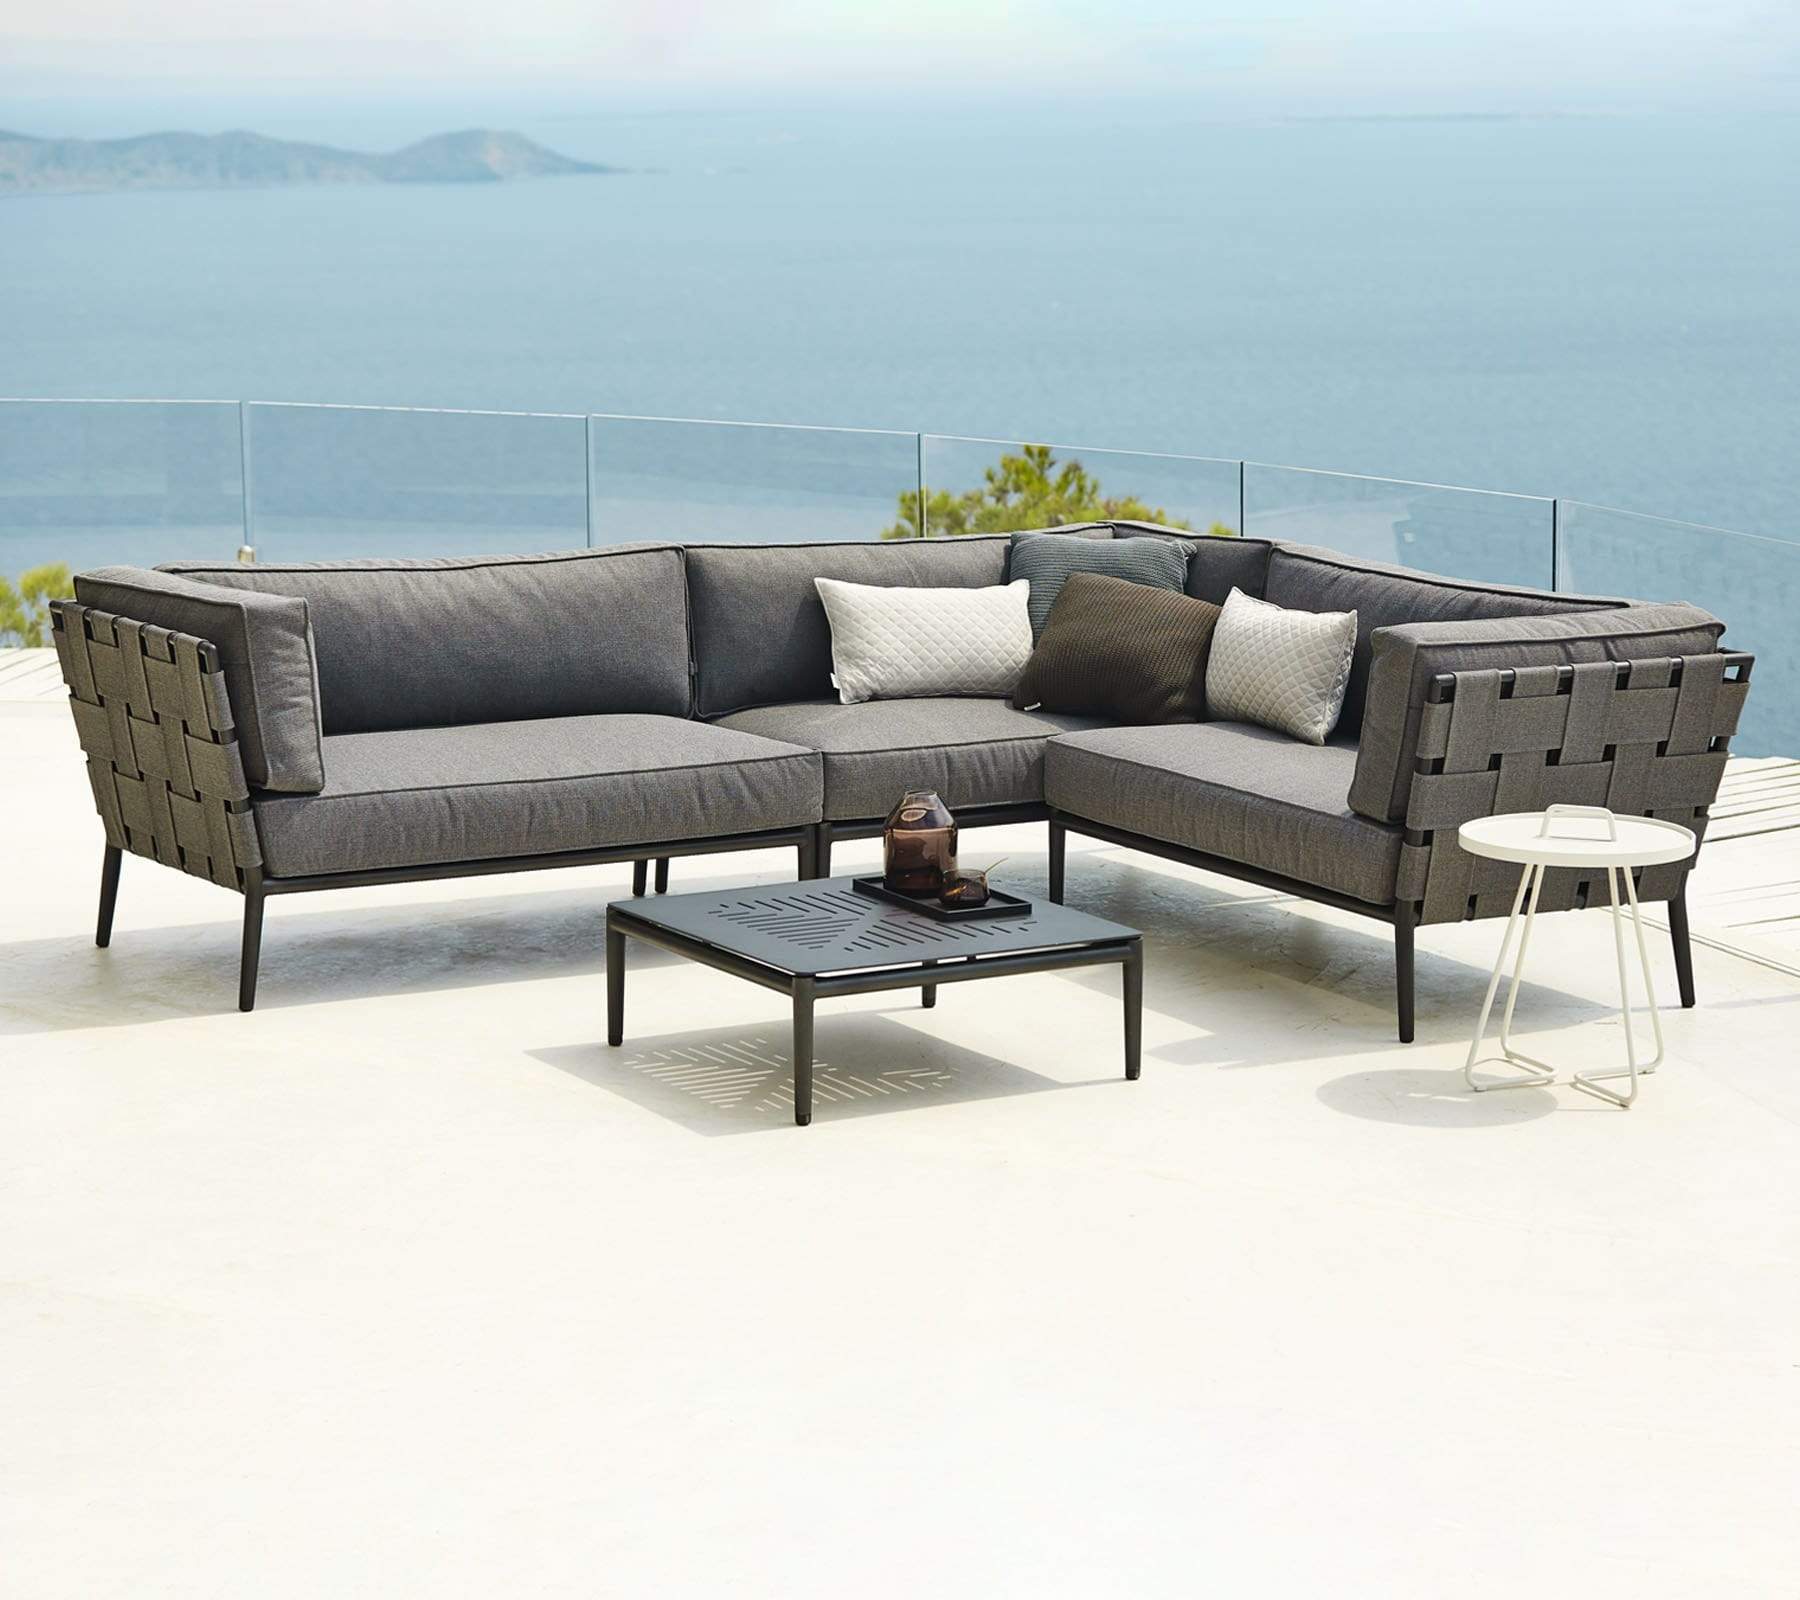 Boxhill's Conic Outdoor Coffee Table Grey lifestyle image with Conic Sectional Sofa